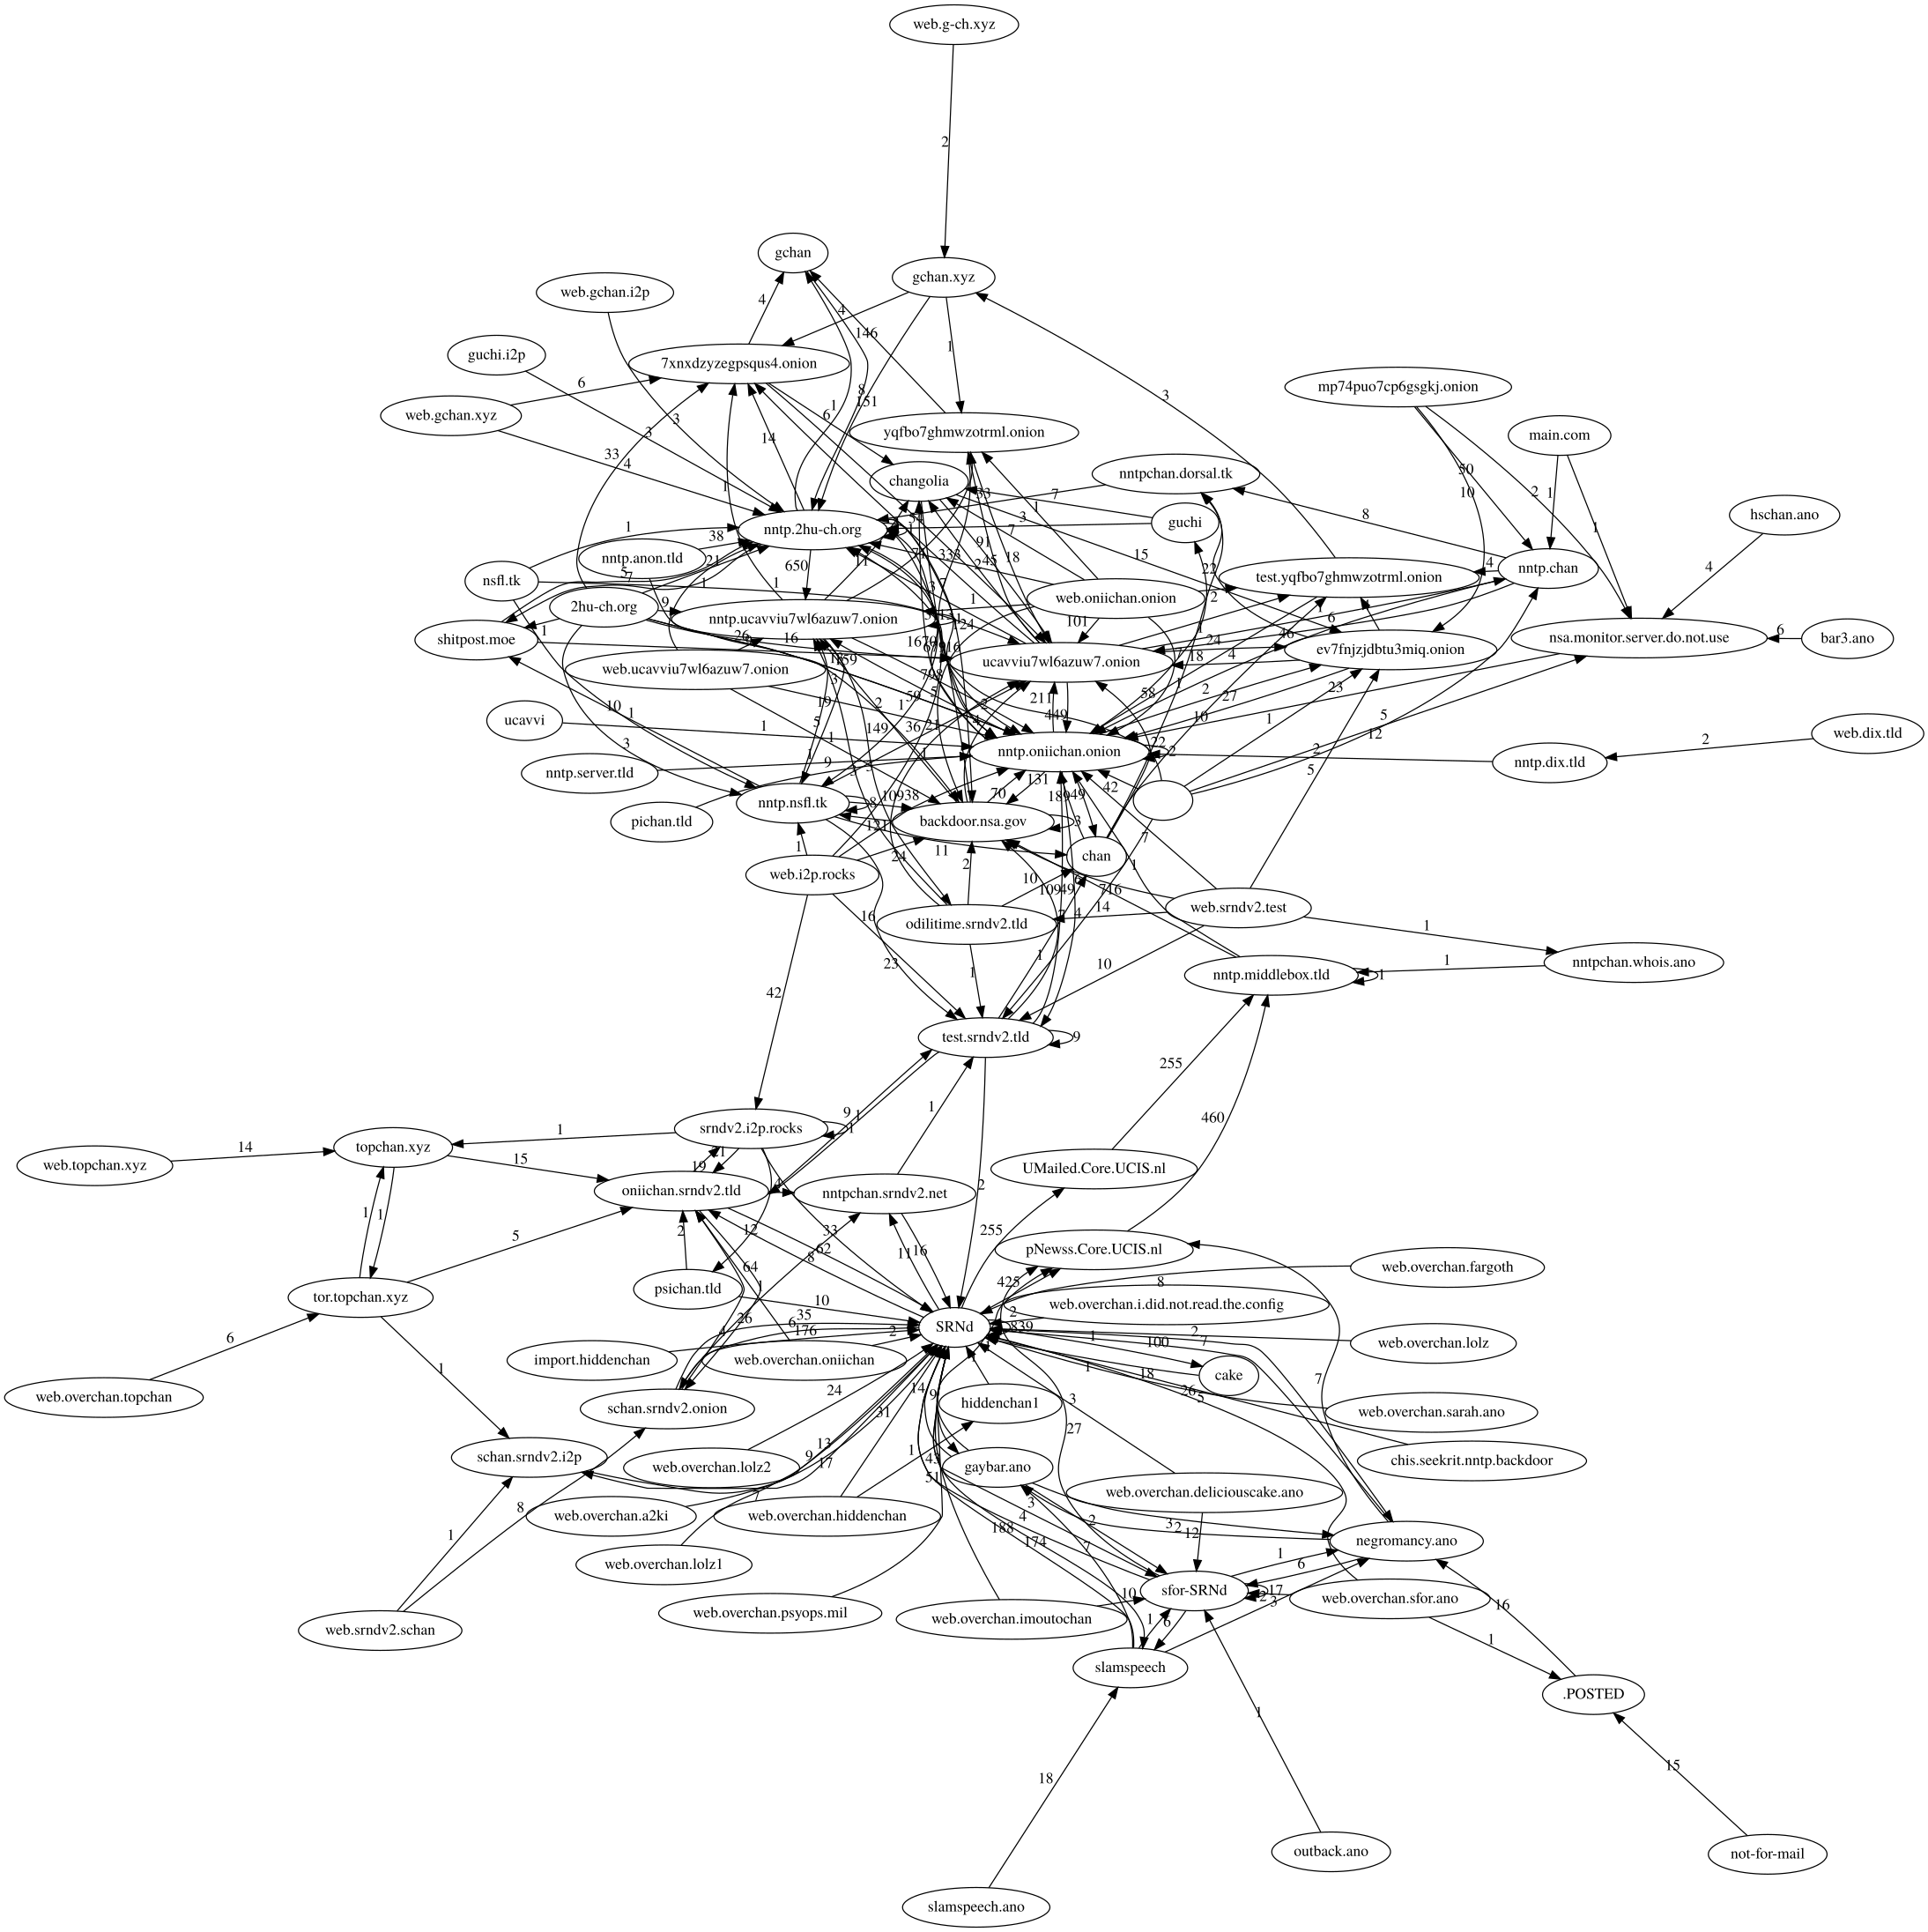 network topology of 4 years